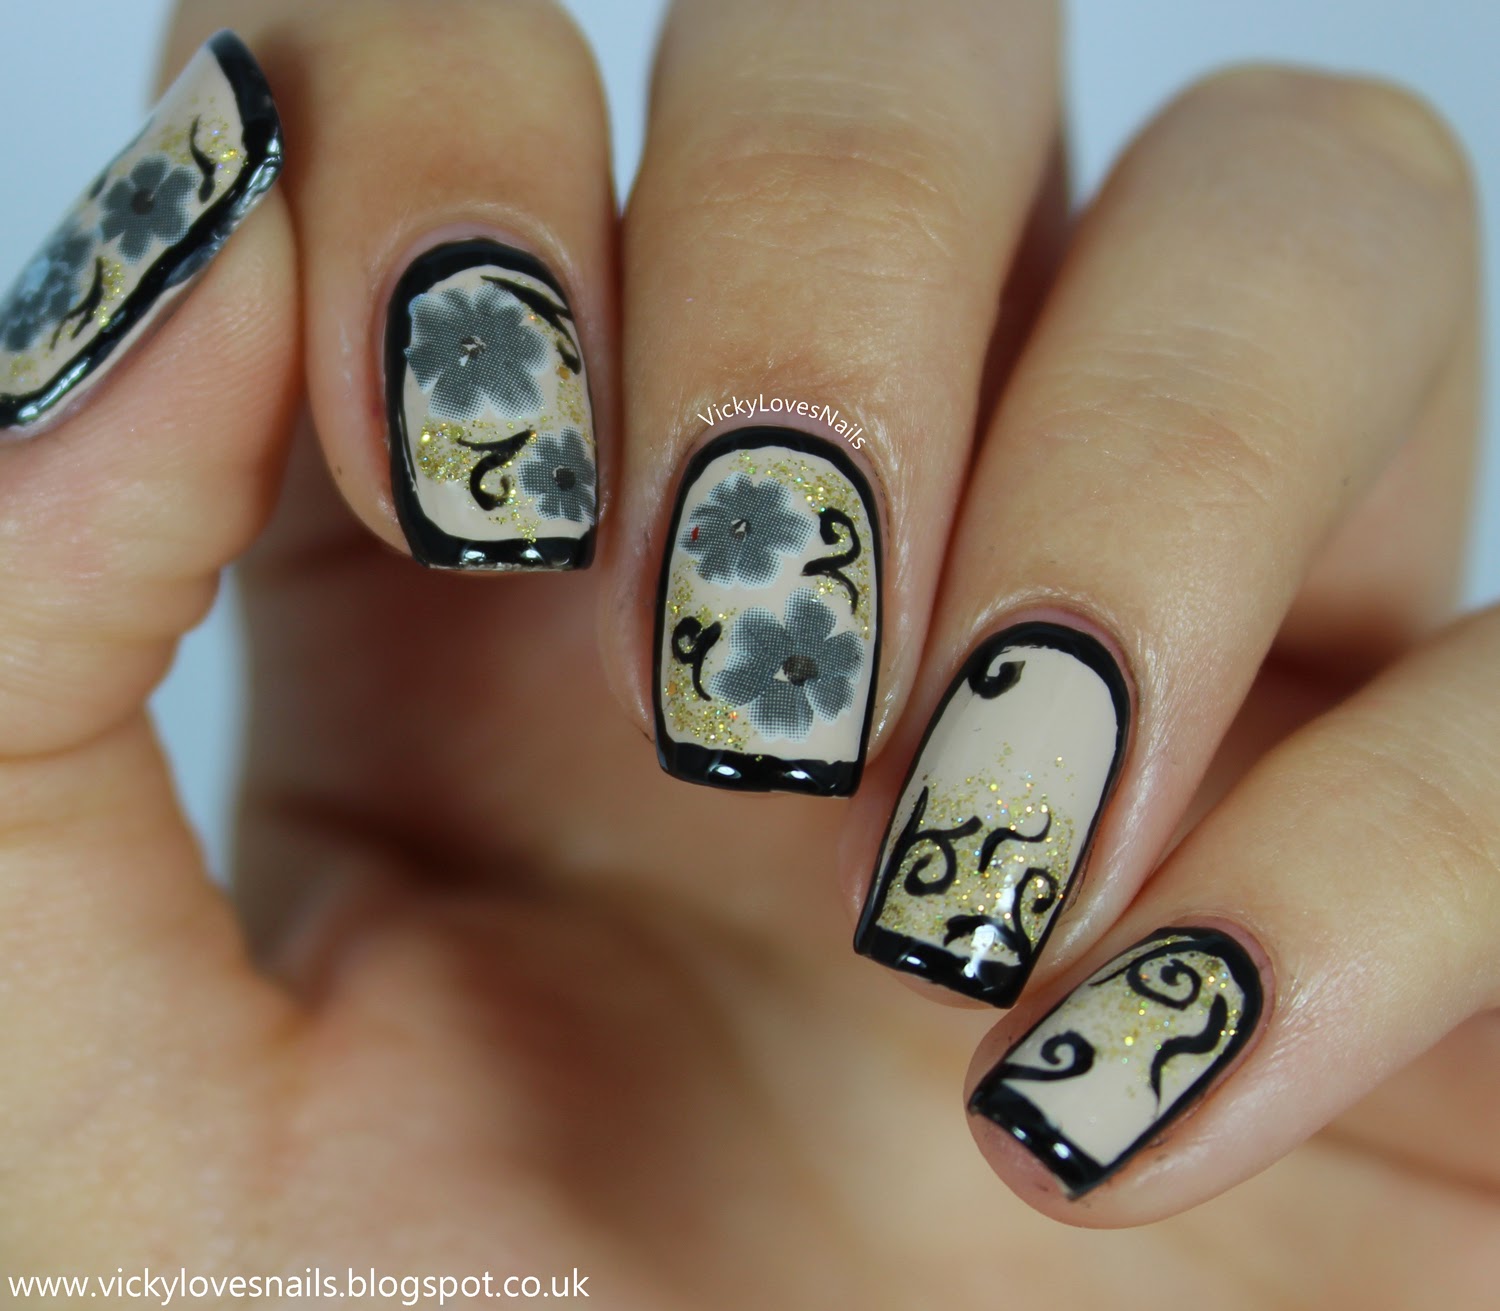 Vicky Loves Nails!: Born Pretty Store Review - Black Floral Water Decals.